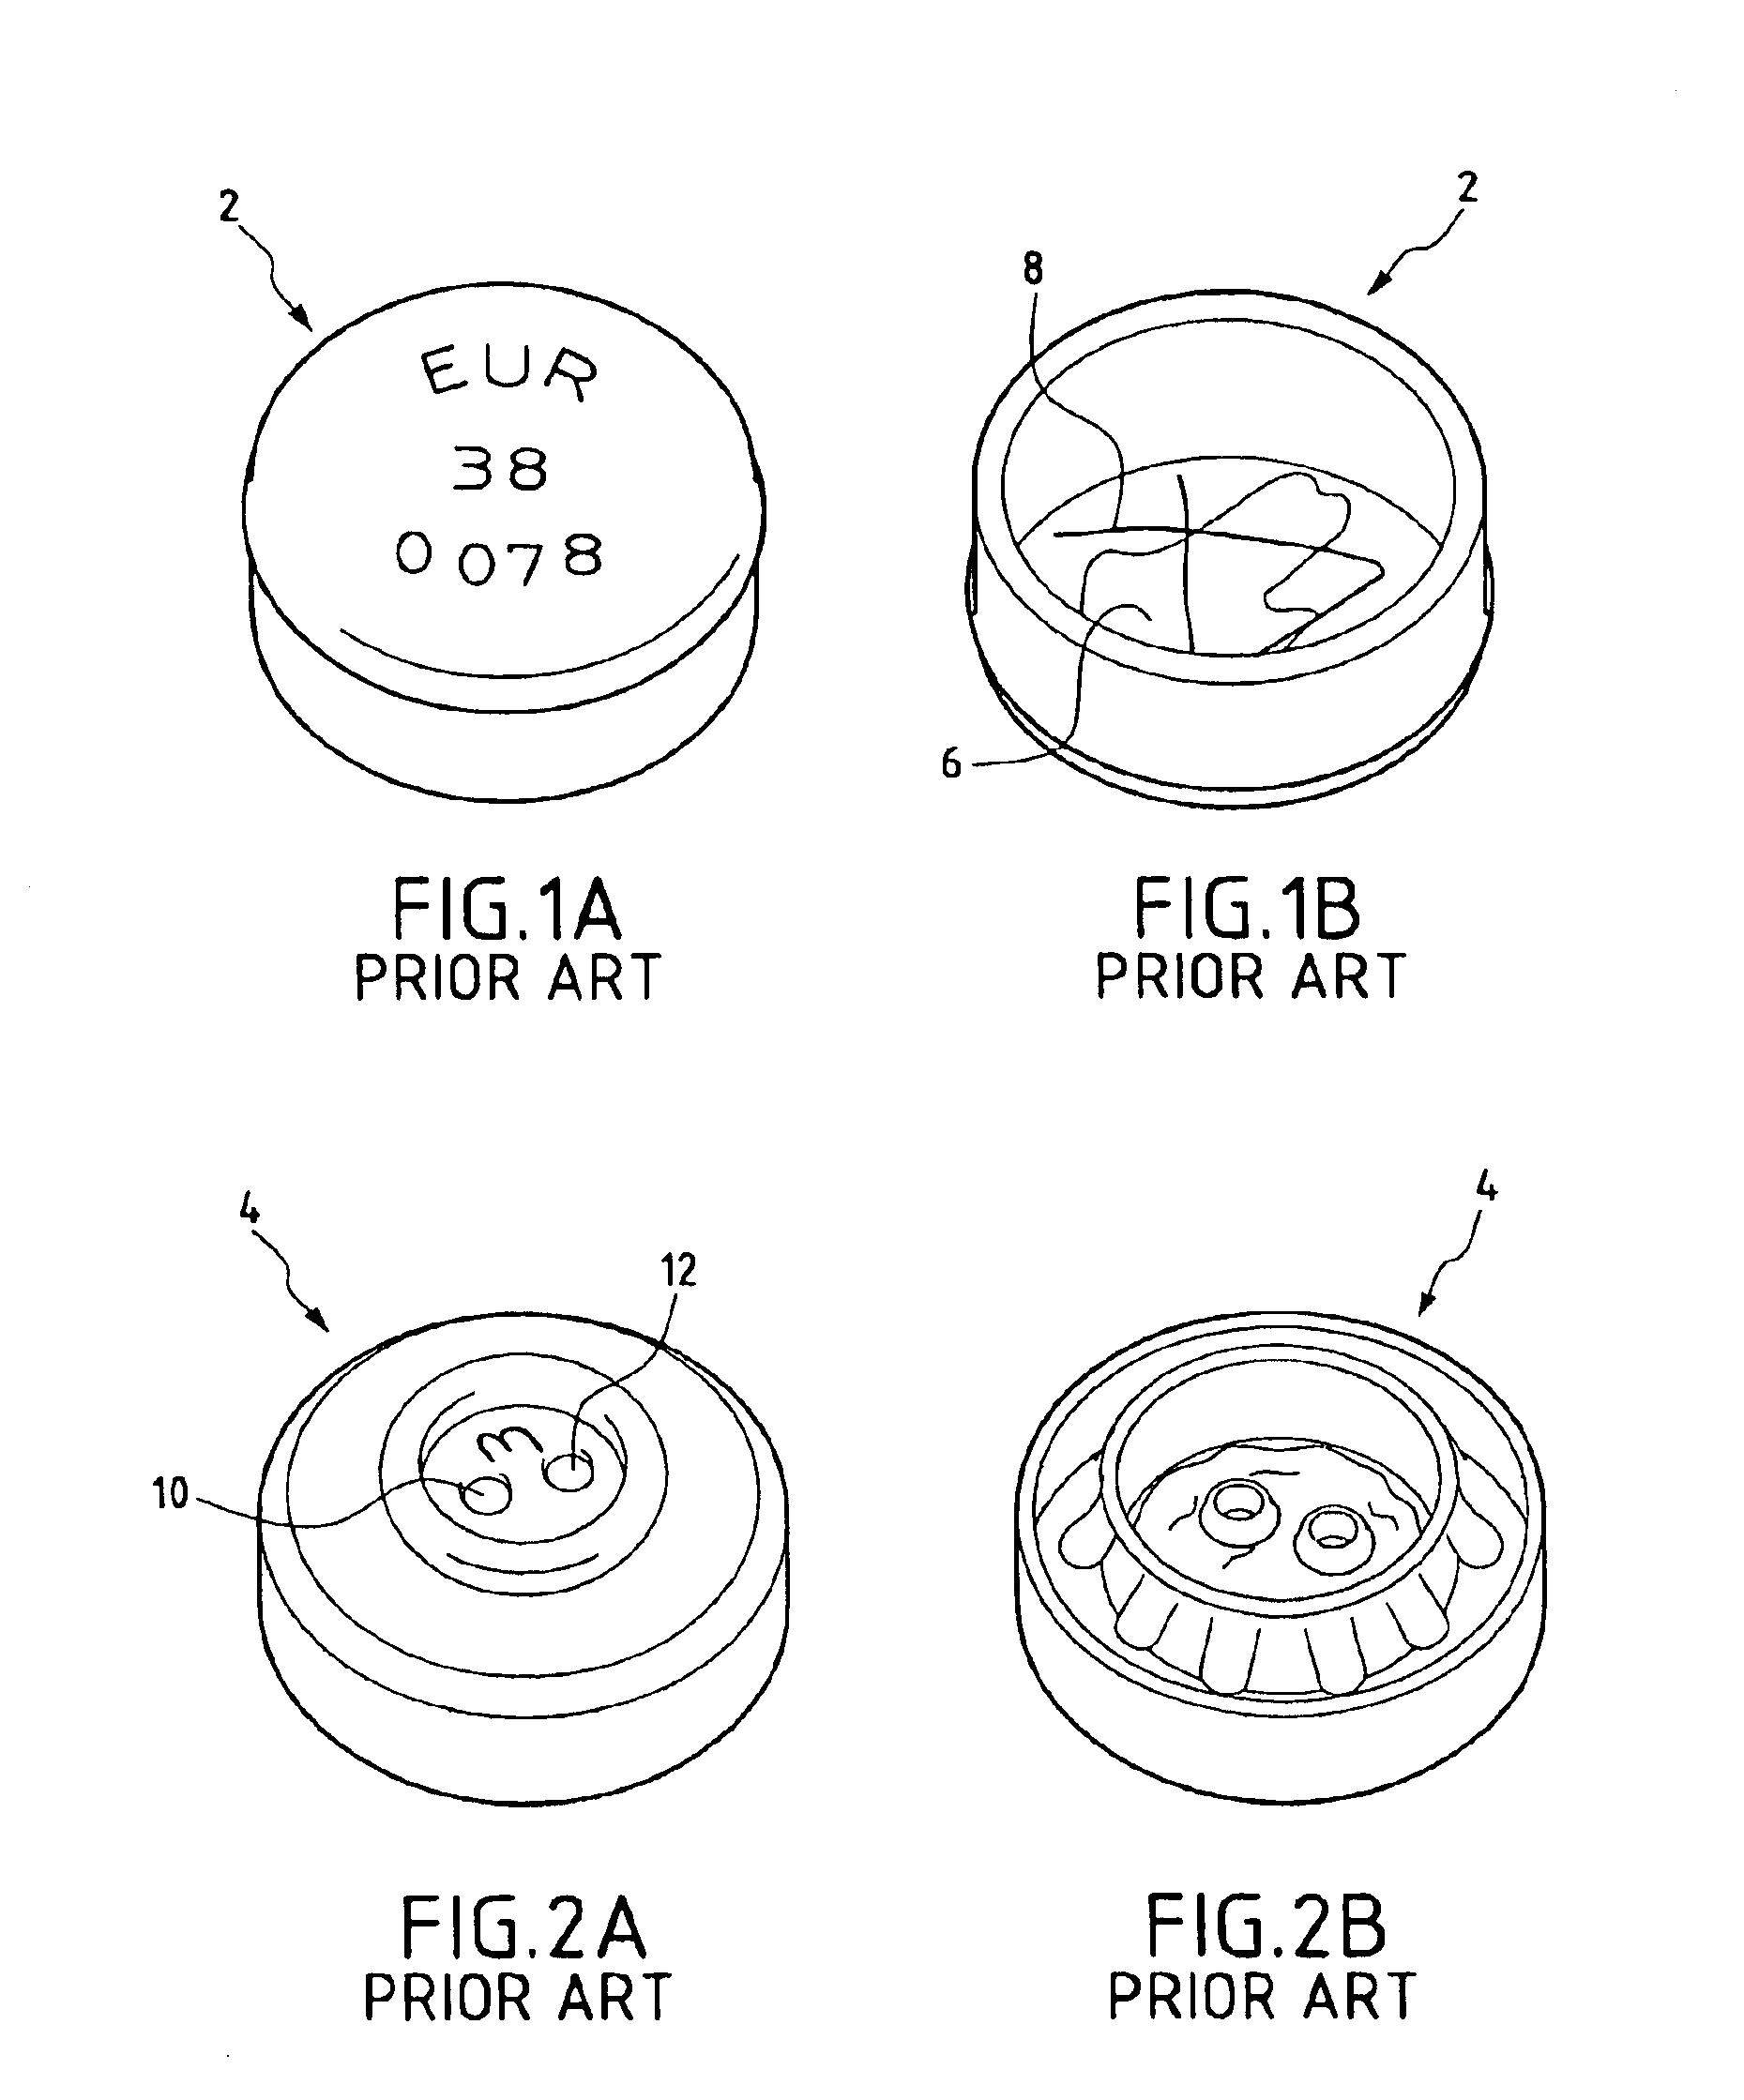 Electronic multipurpose seal with passive transponder